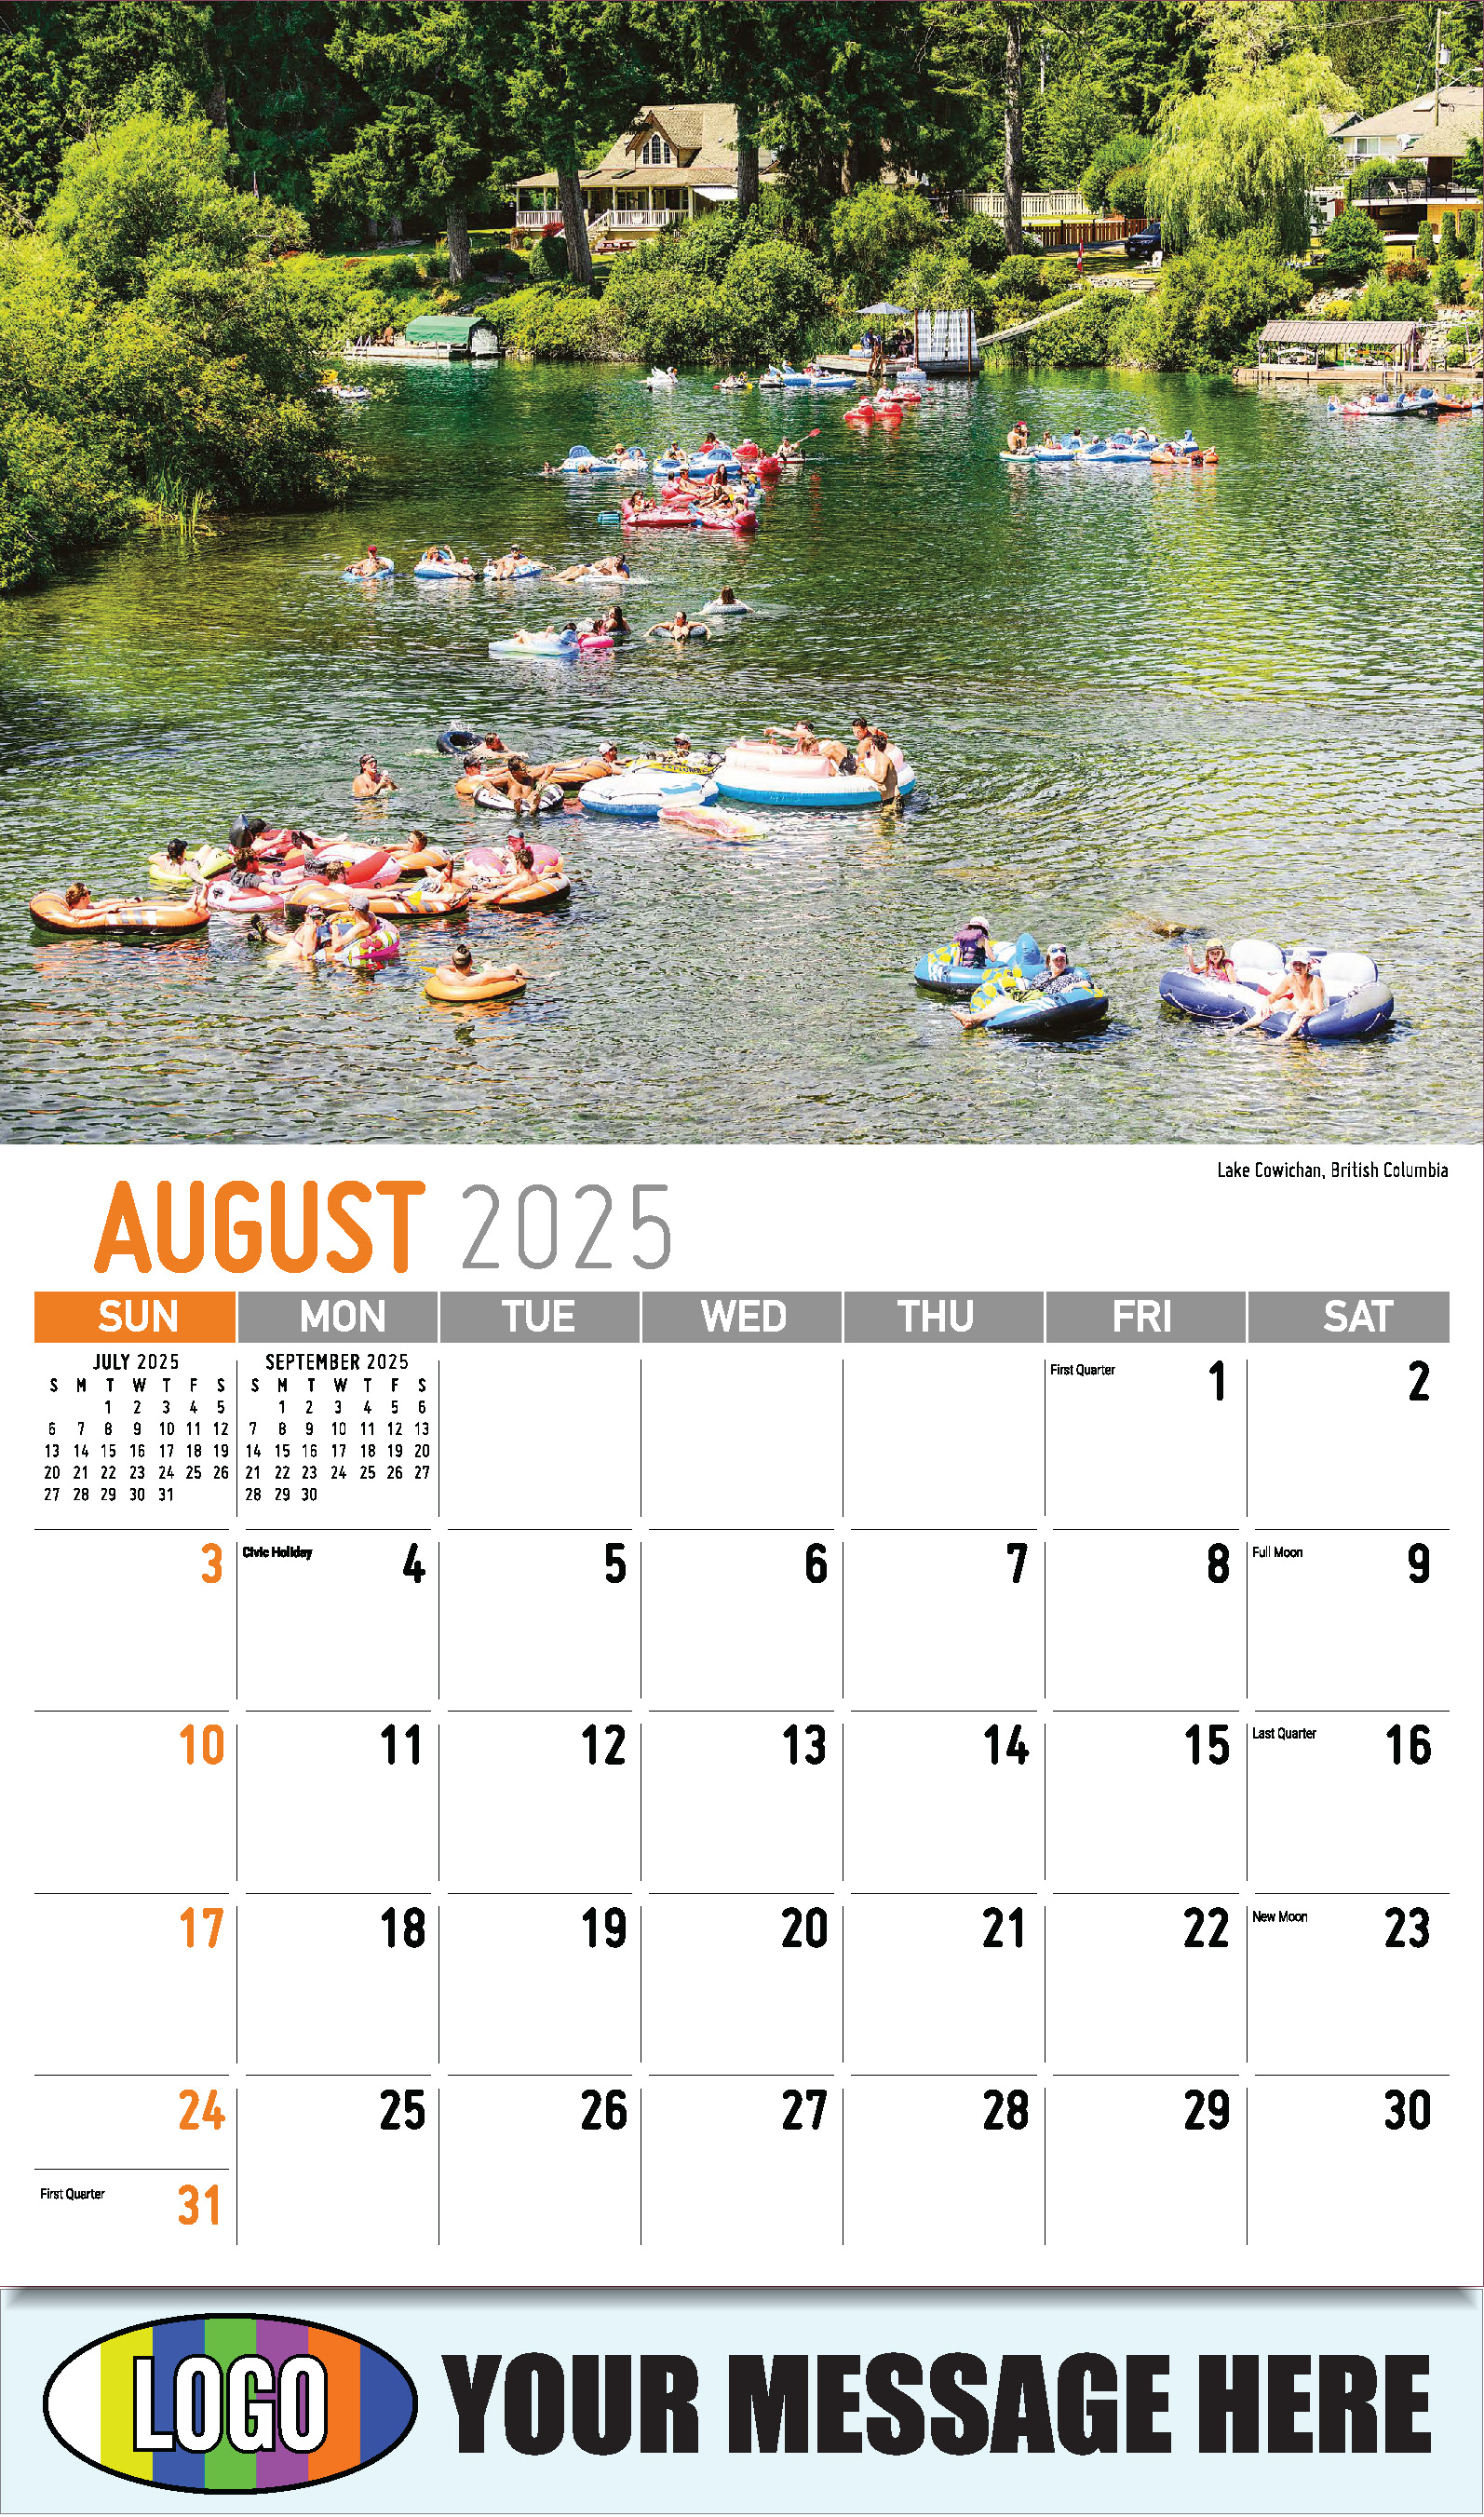 Scenes of Western Canada 2025 Business Promotional Wall Calendar - August